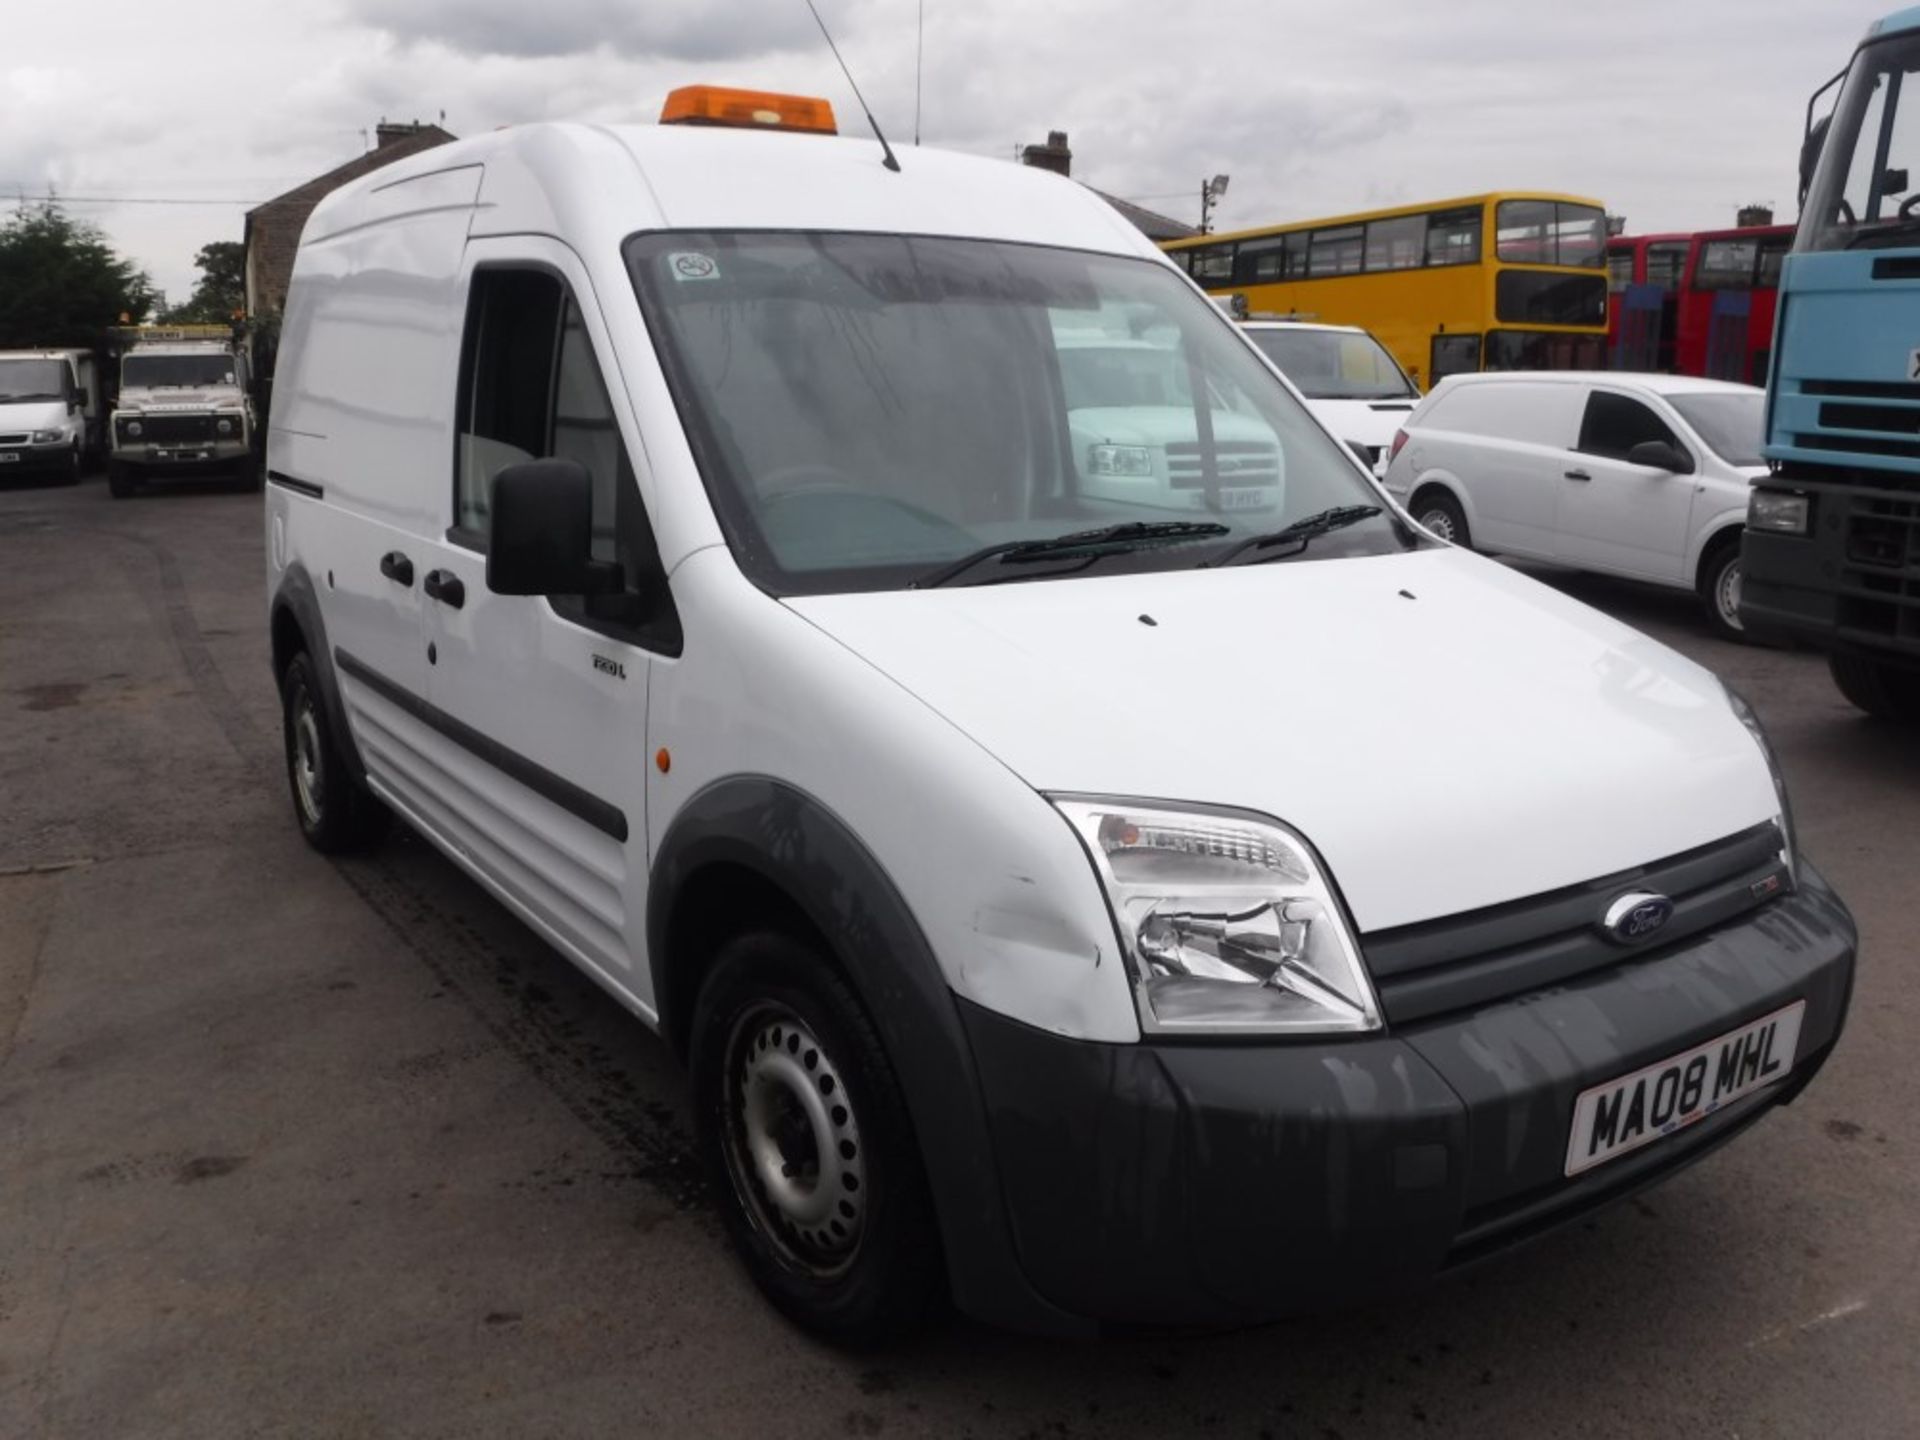 08 reg FORD TRANSIT CONNECT T230 L90, 1ST REG 04/08, TEST 04/16, 65349M, V5 HERE, 1 OWNER FROM